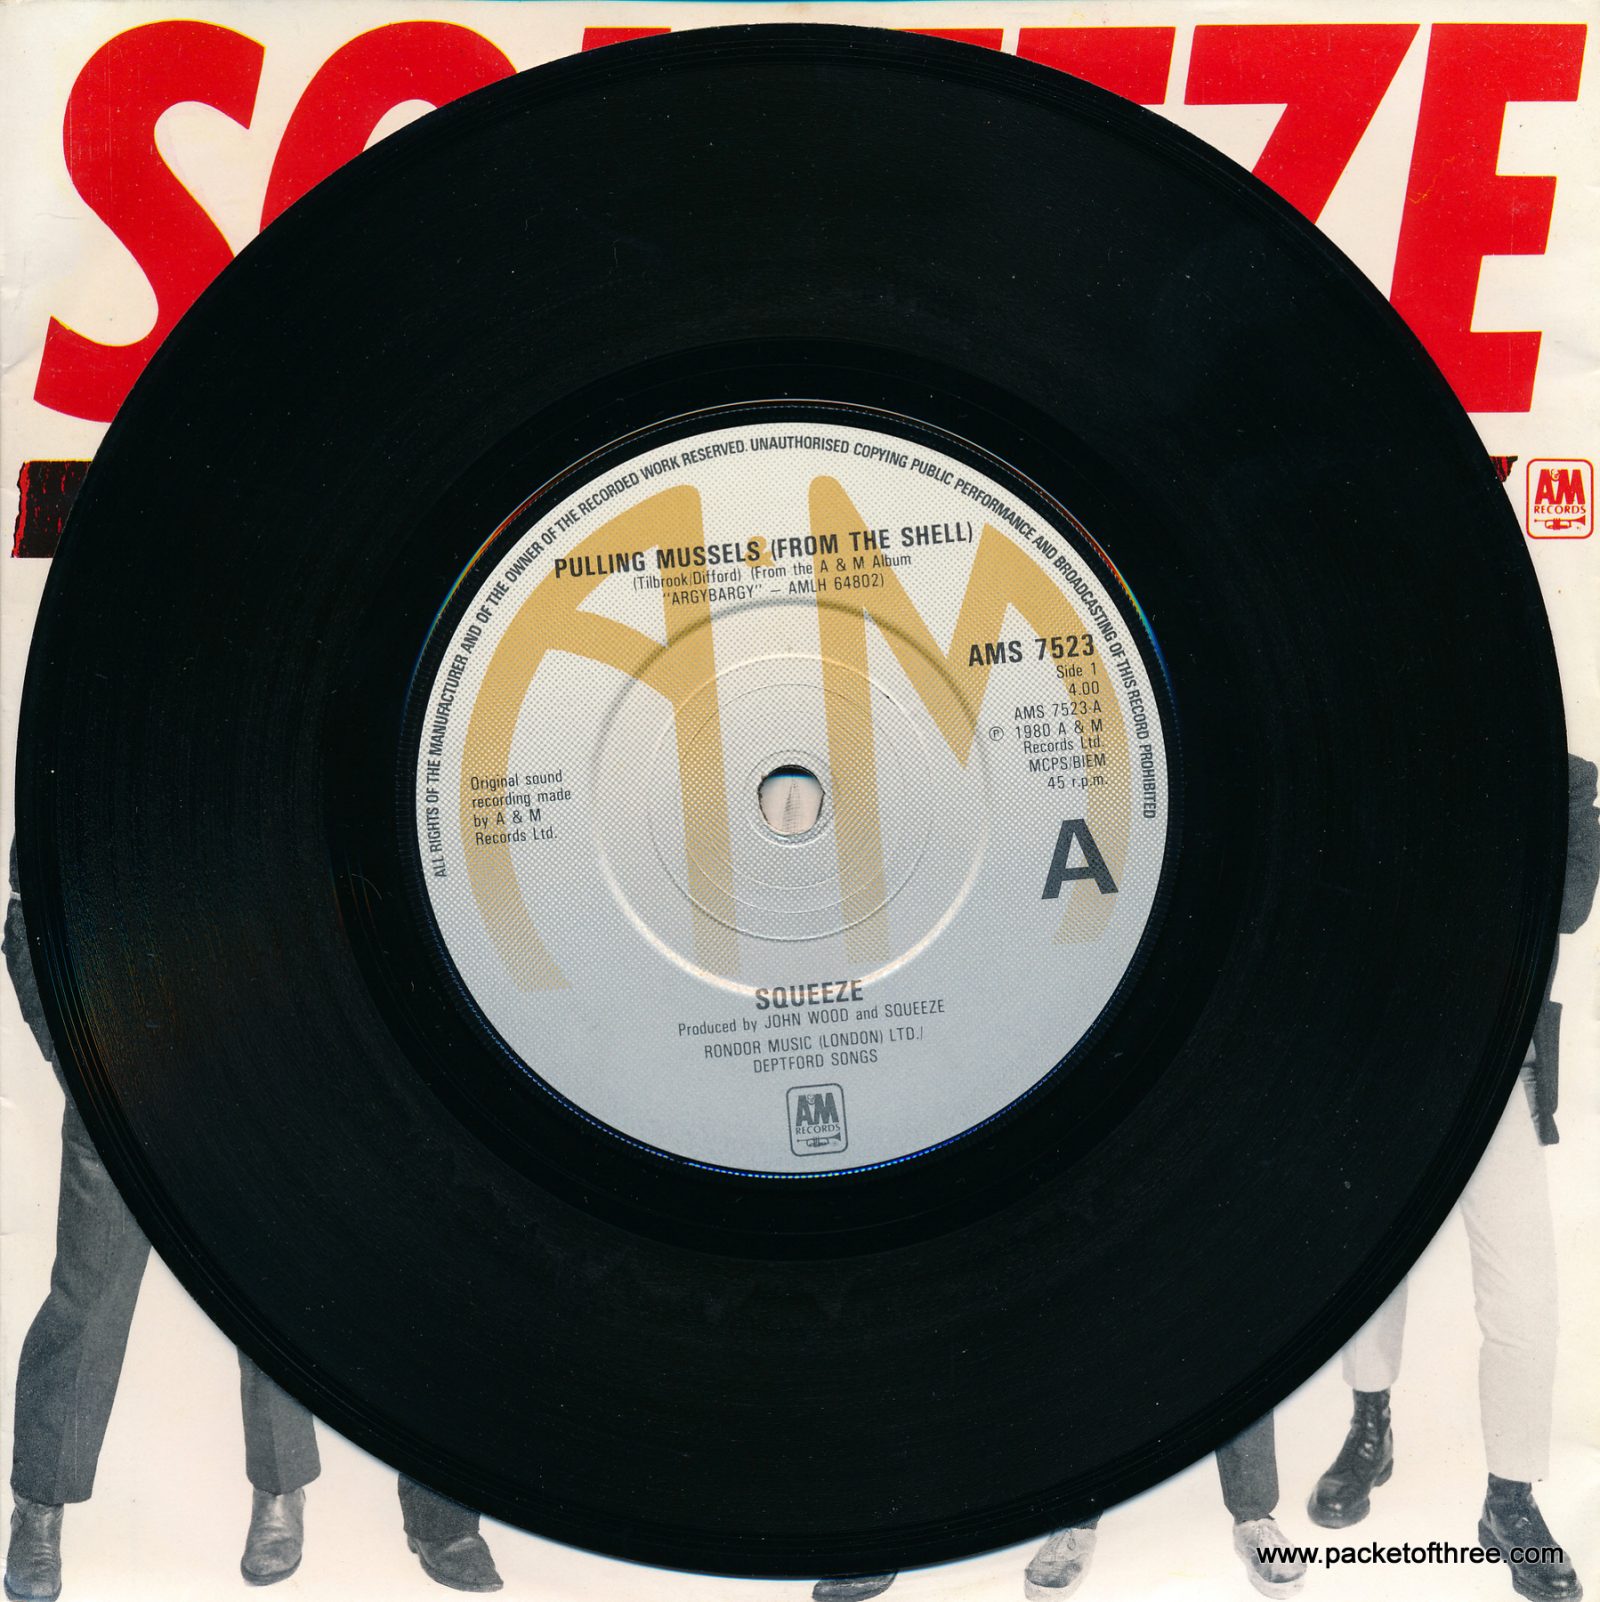 Pulling Mussels (From the Shell) - UK - 7" - picture sleeve